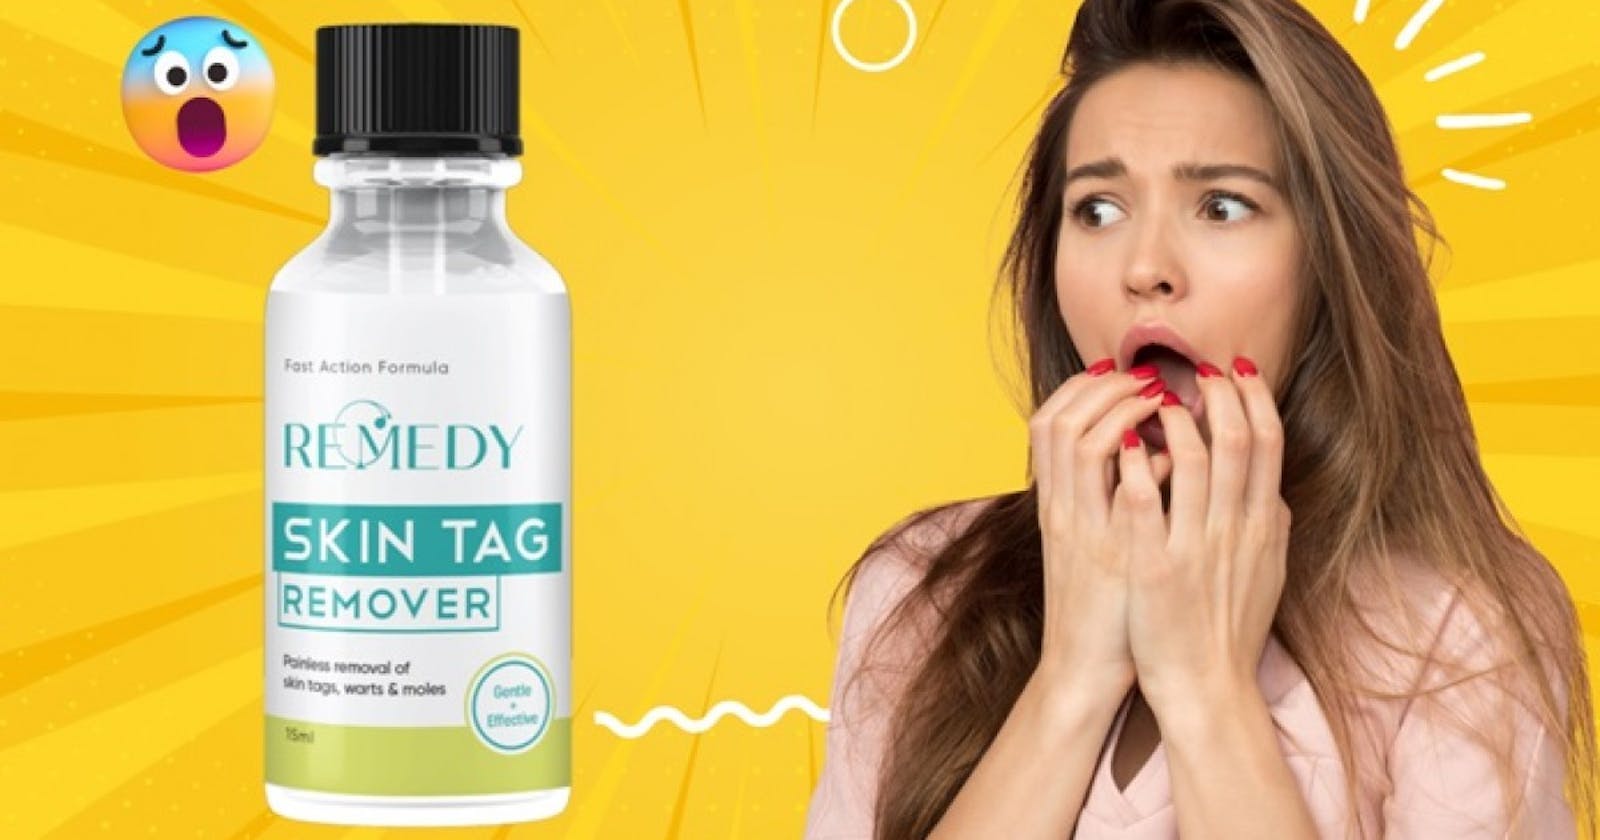 Remedy Skin Tag Remover Reviews - Does It Work or Fake Customer Results?